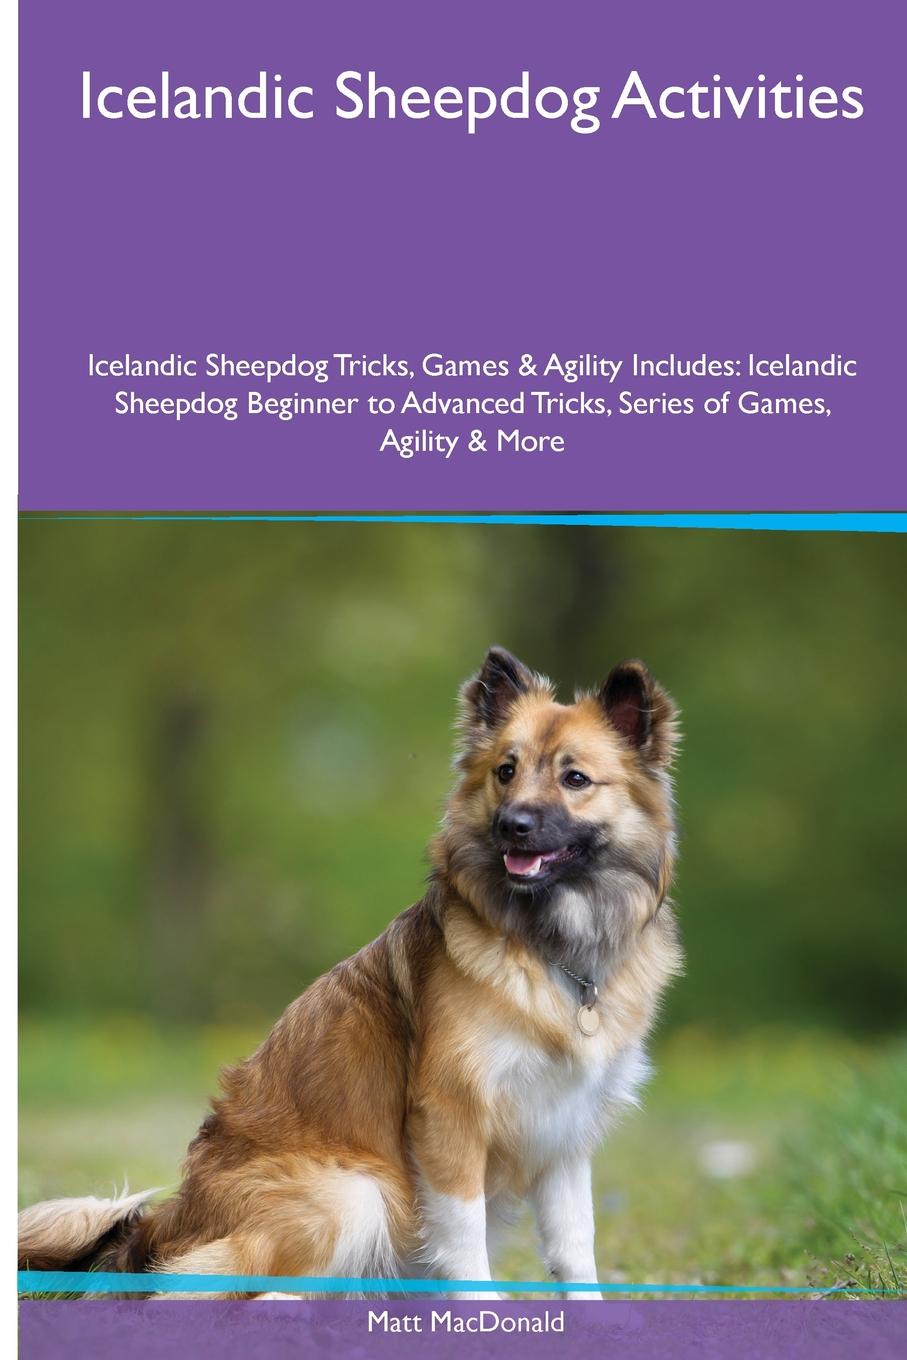 Icelandic Sheepdog  Activities Icelandic Sheepdog Tricks, Games & Agility. Includes. Icelandic Sheepdog Beginner to Advanced Tricks, Series of Games, Agility and More